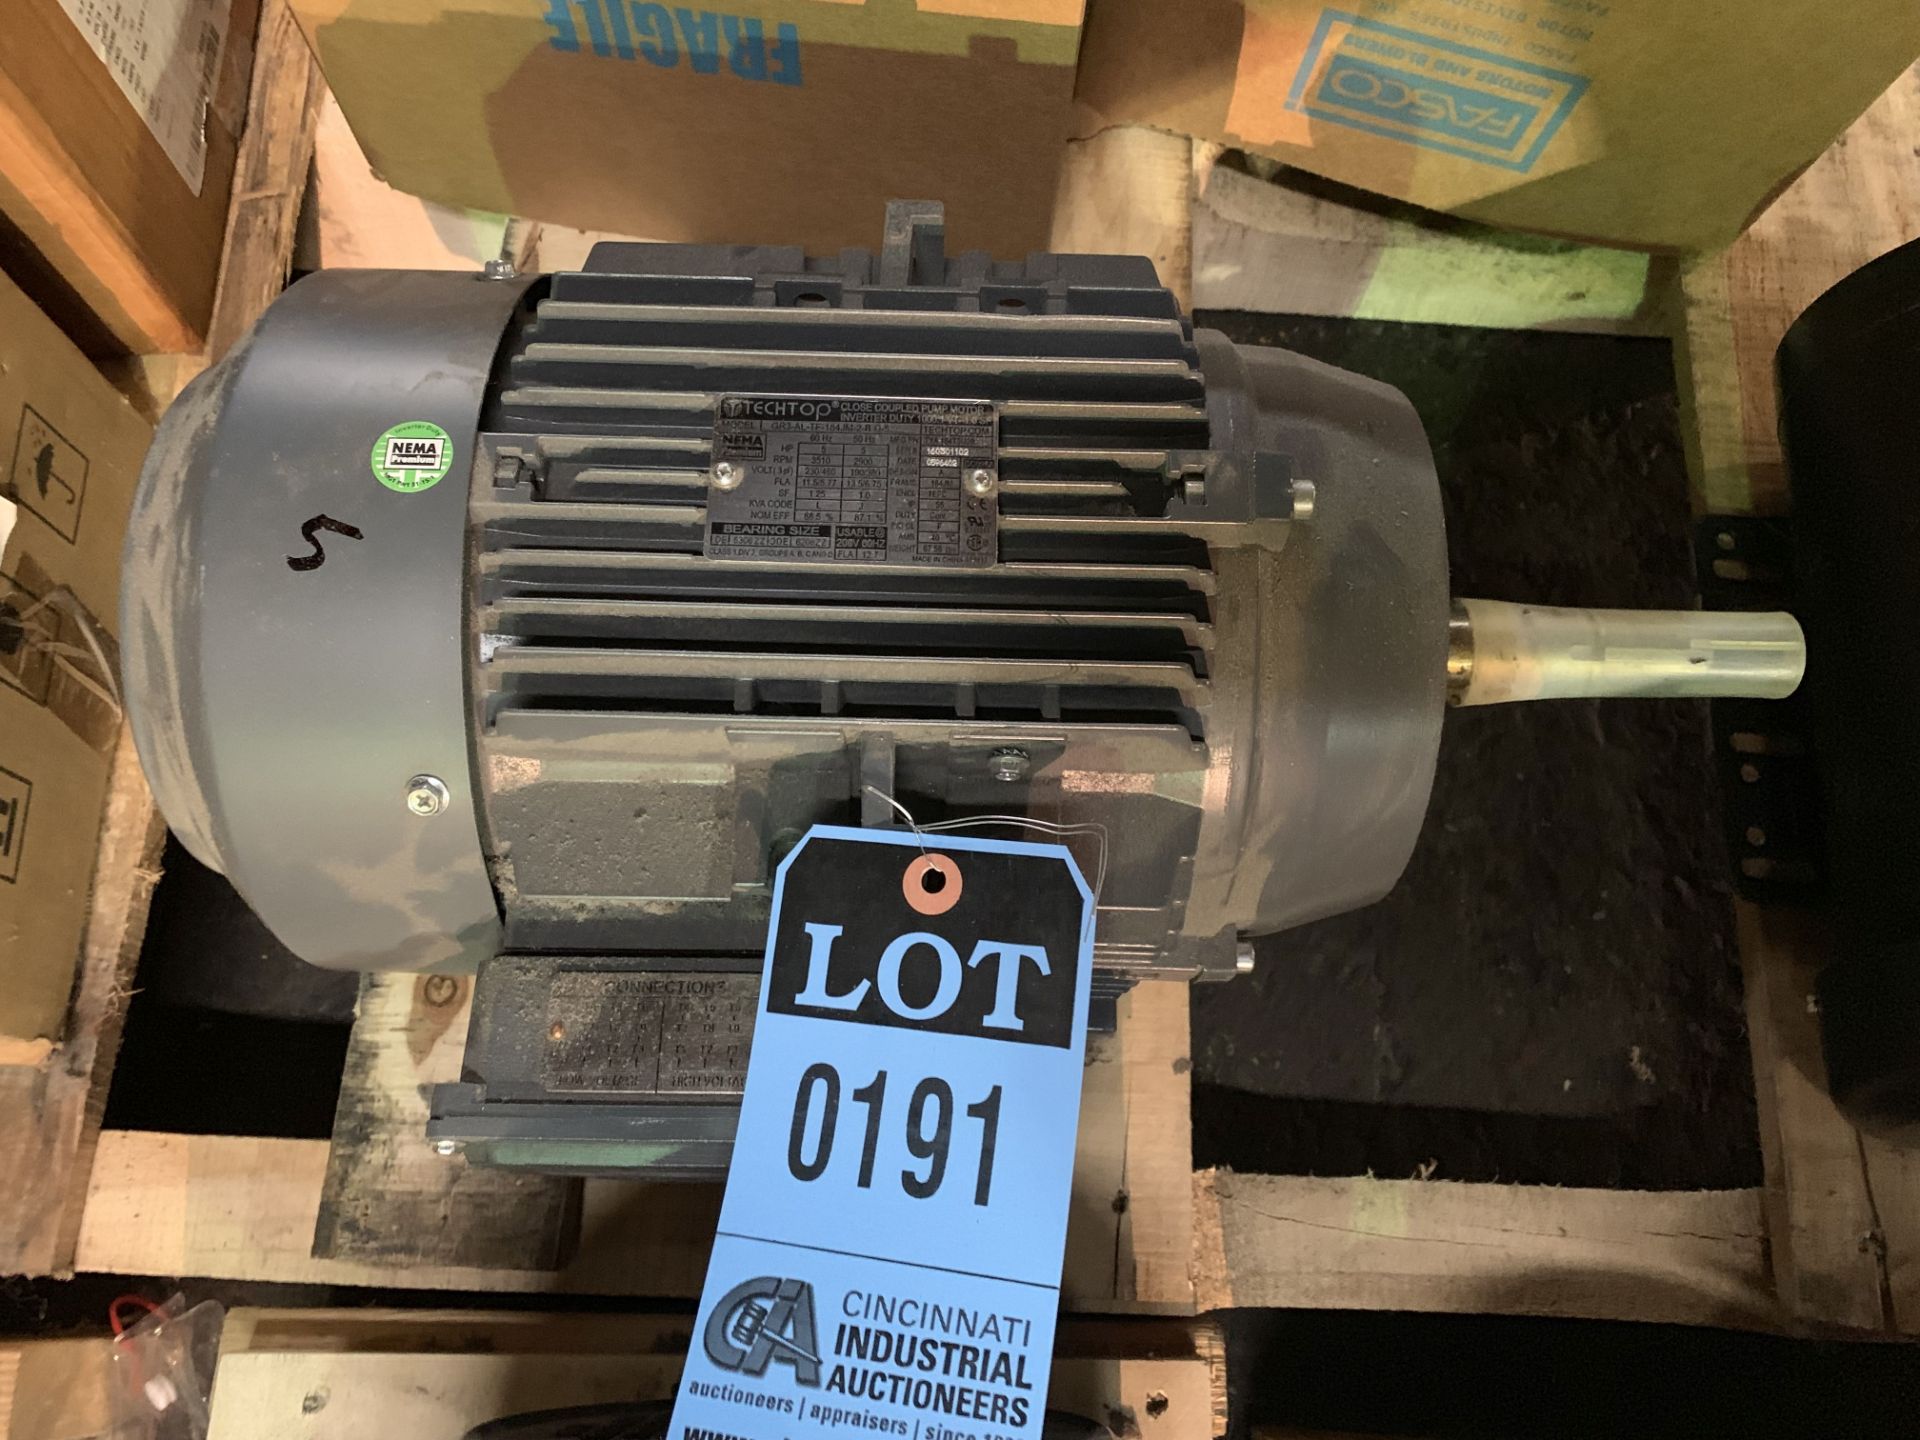 5 HP TECHTOP ELECTRIC MOTOR - NEW **LOCATED AT 111 W. WESTCOTT WAY**